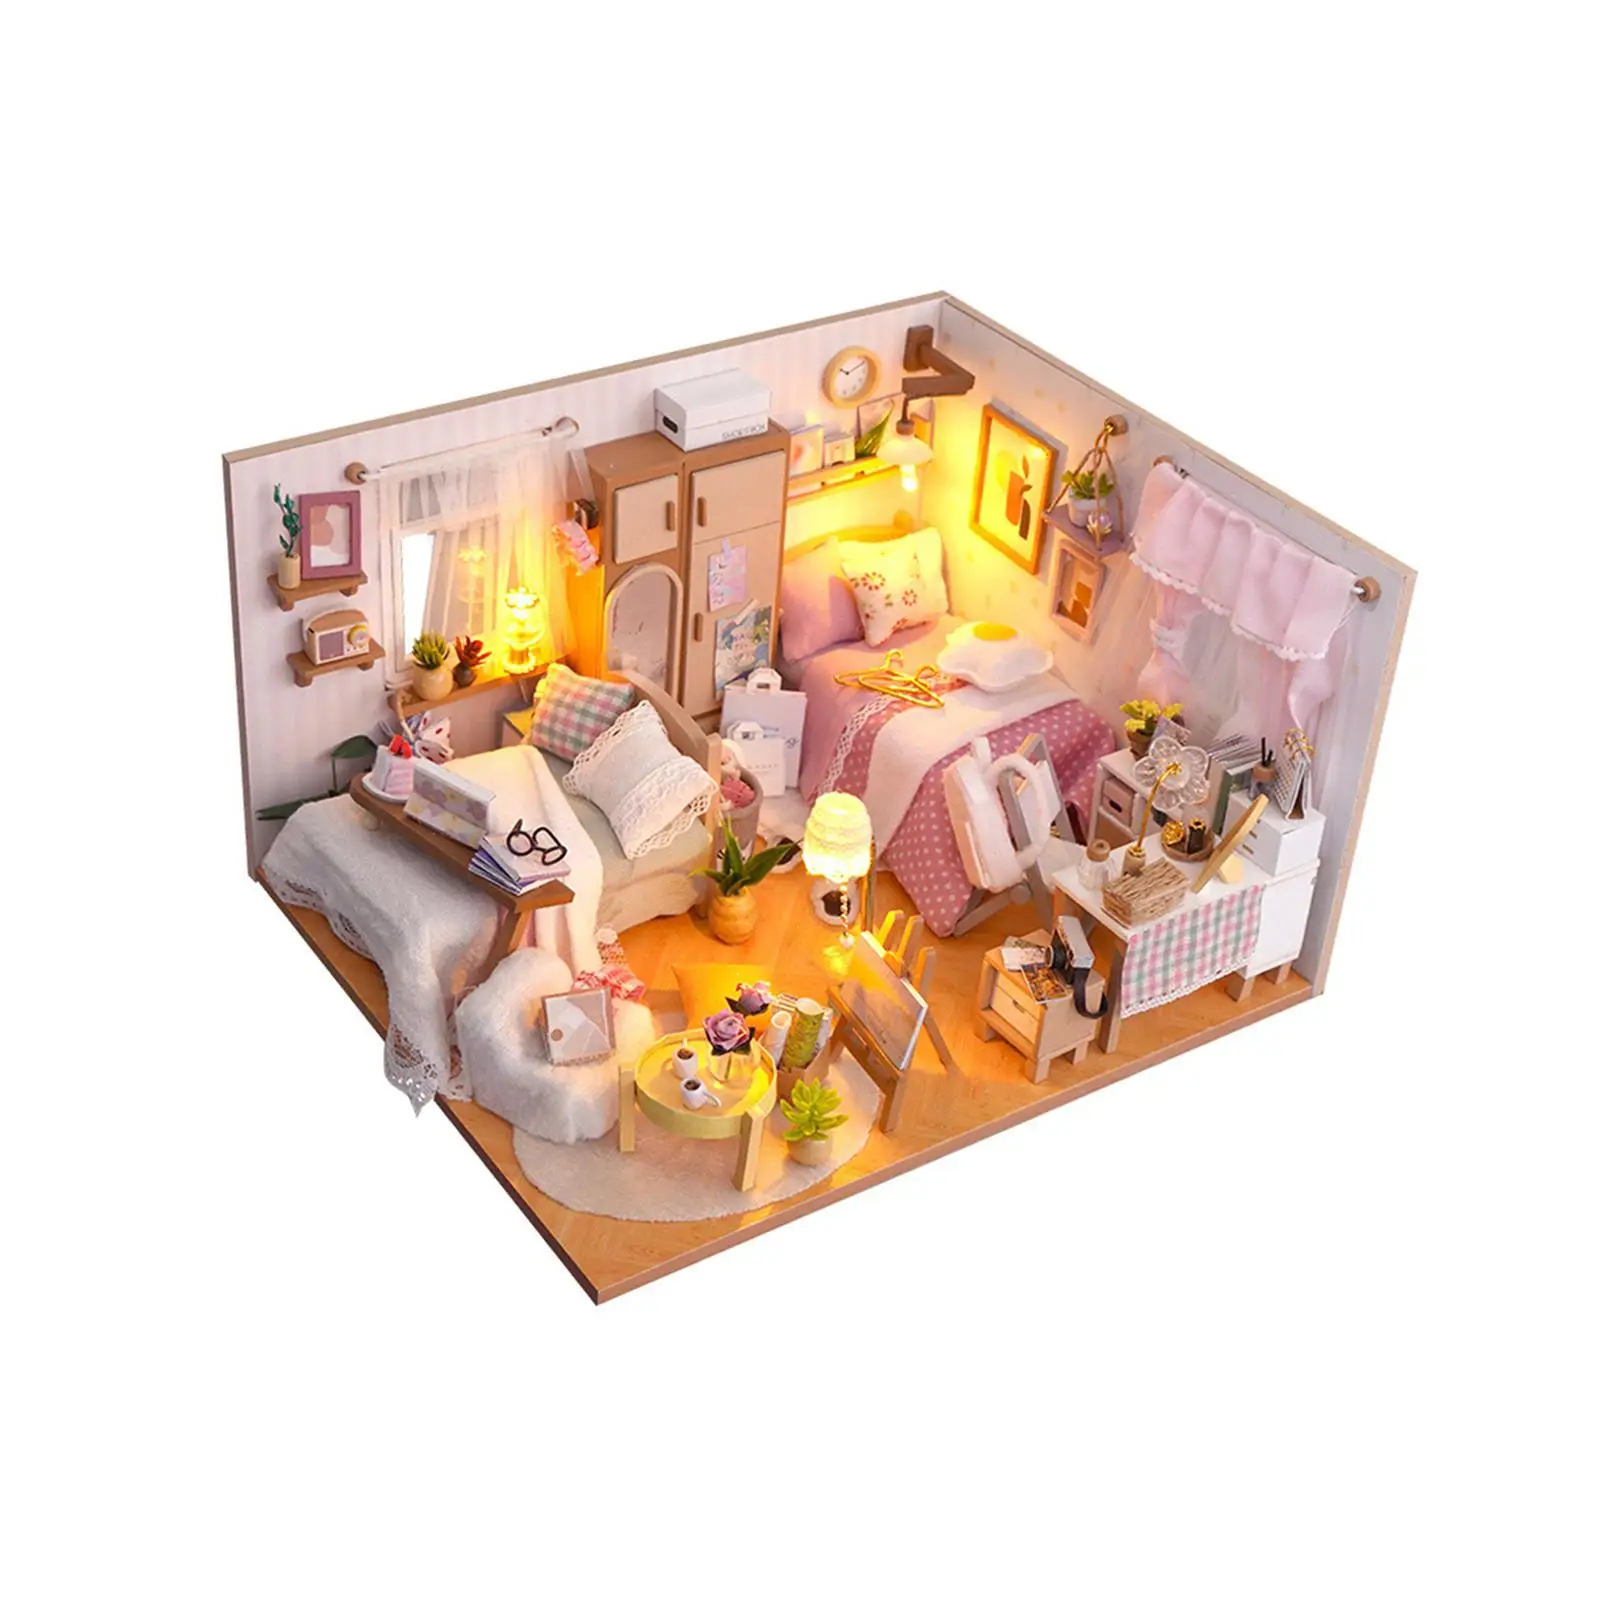 DIY Wooden Miniature Dollhouse Kits for Kids Adults with Lights Perfect Gift Modern Educational Toy Room Box Doll House Model